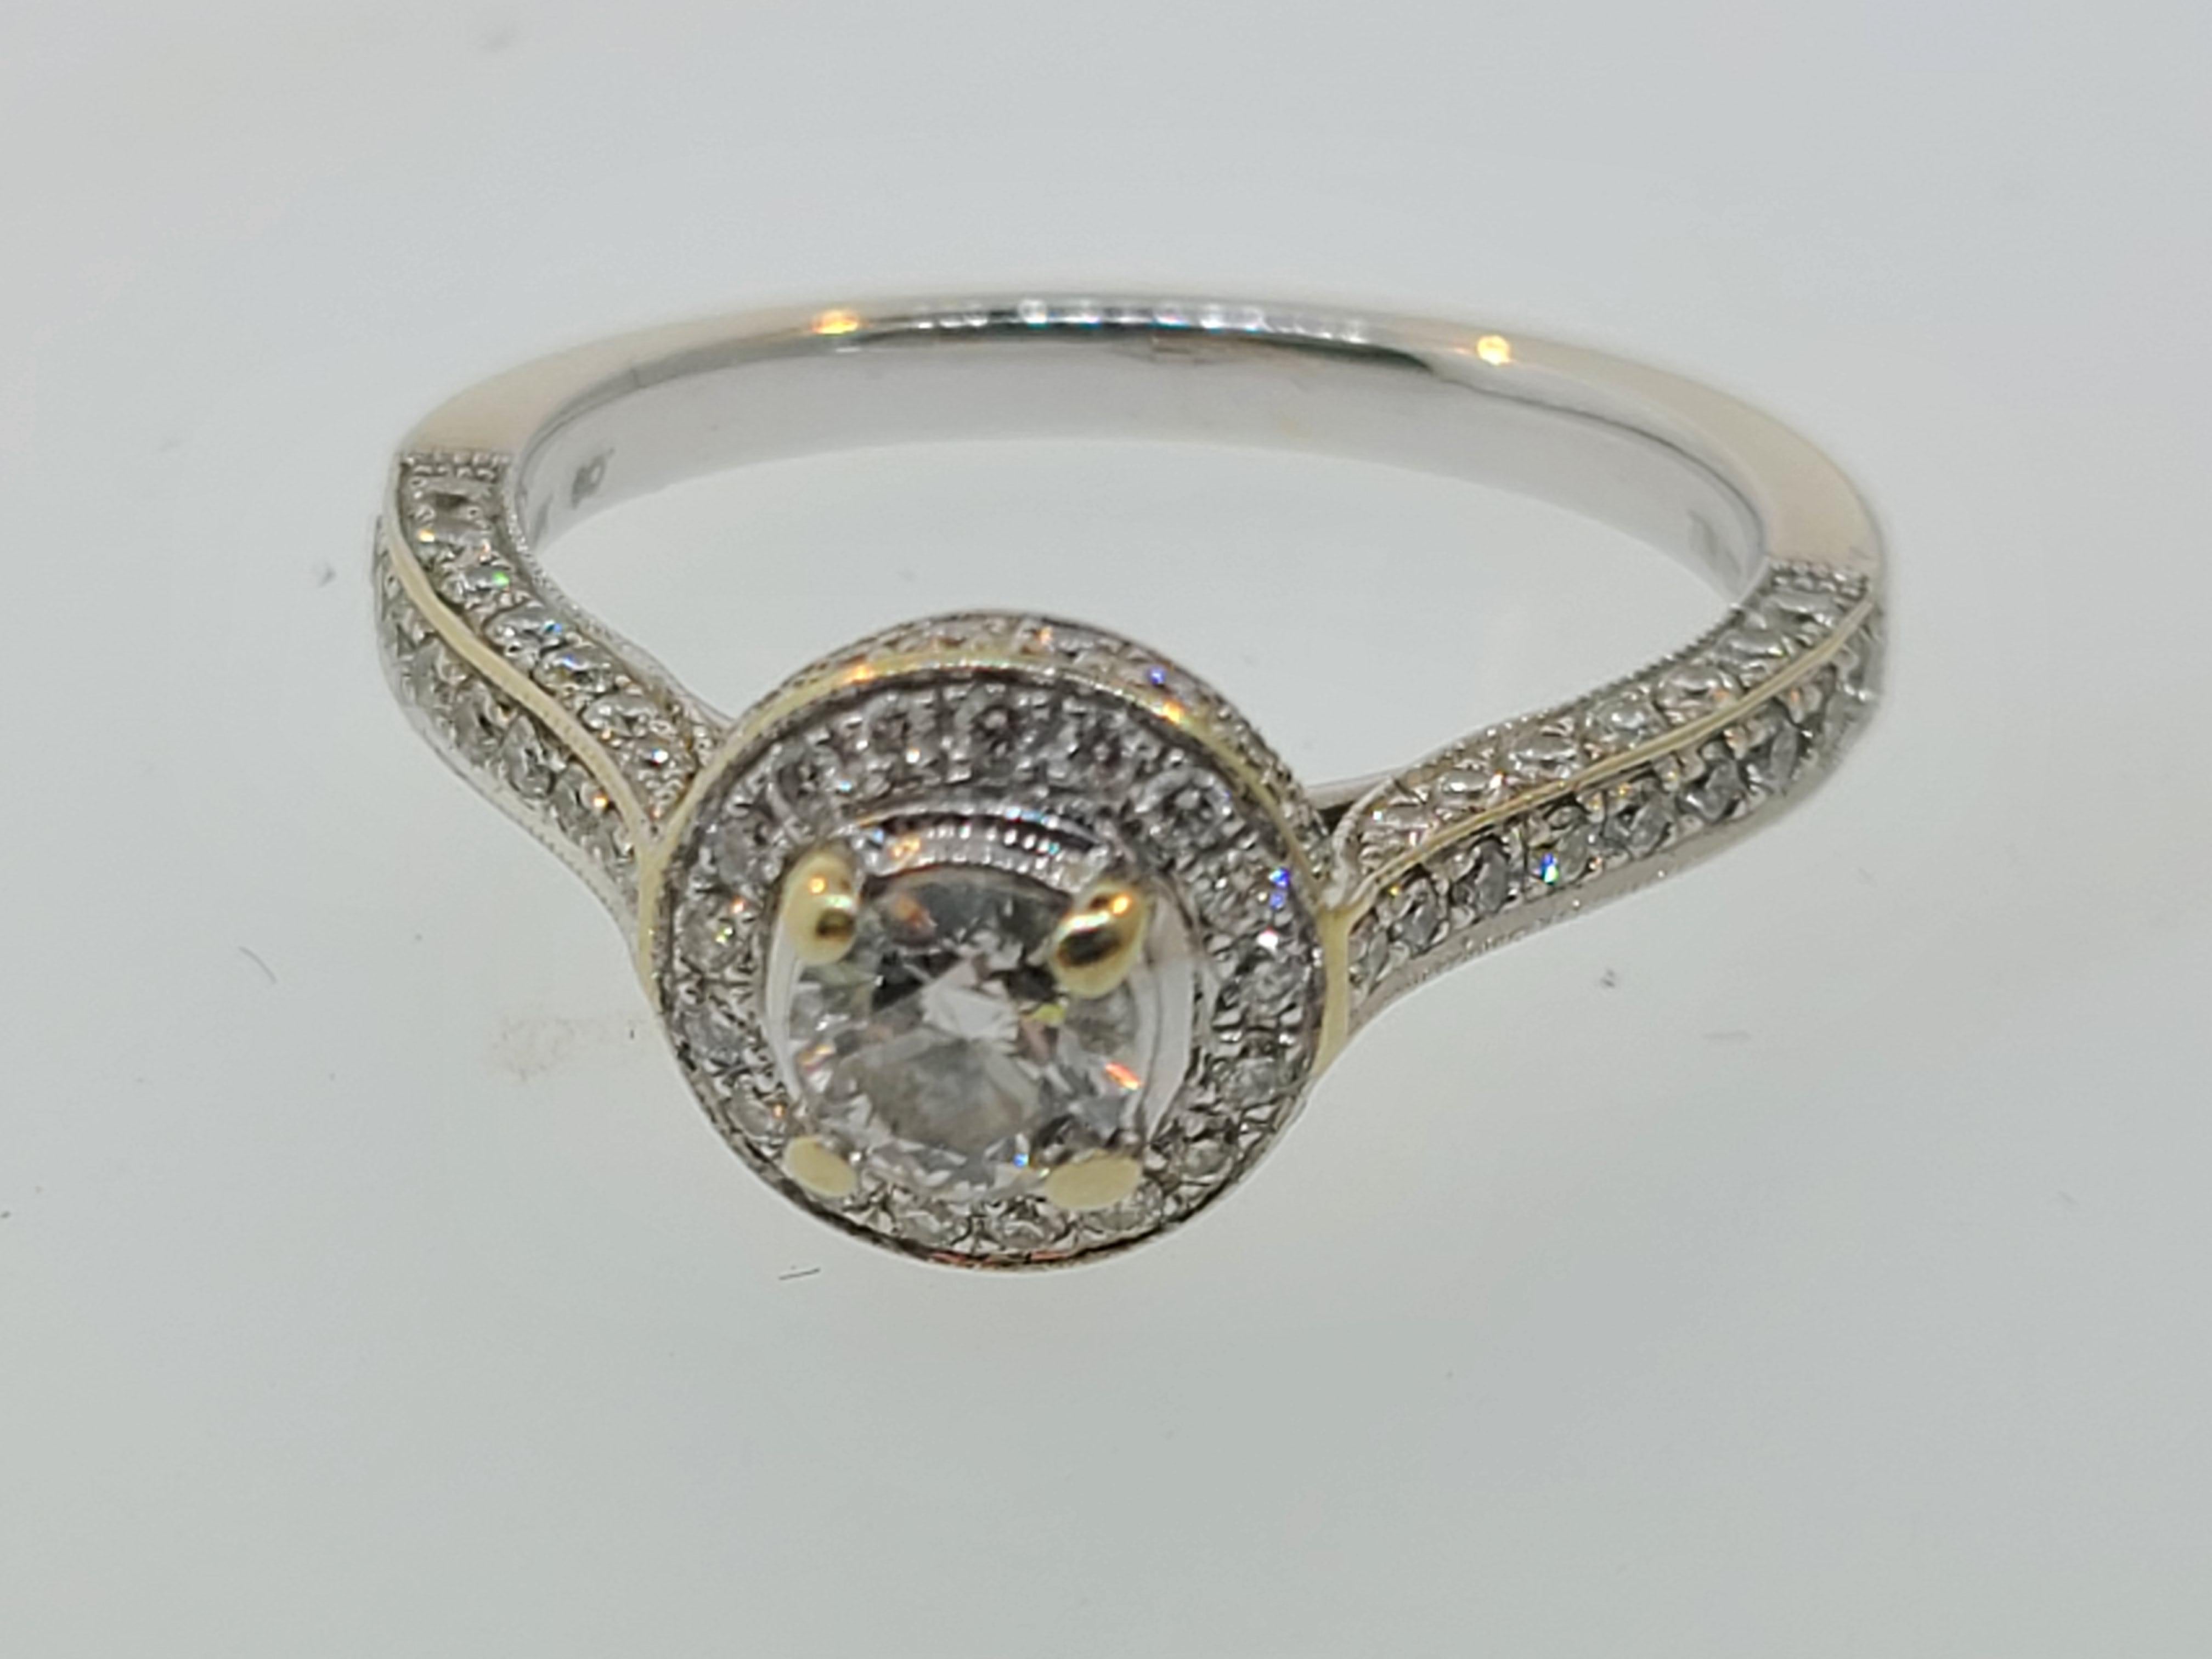 This contemporary halo diamond engagement ring is set in 14K white gold with a 4.3mm main stone and accent diamonds totaling 7/8ct total weight.

Ring Size 6.5 (US)
Total weight is 3.5 grams. 
There is some wear to the rhodium plating.